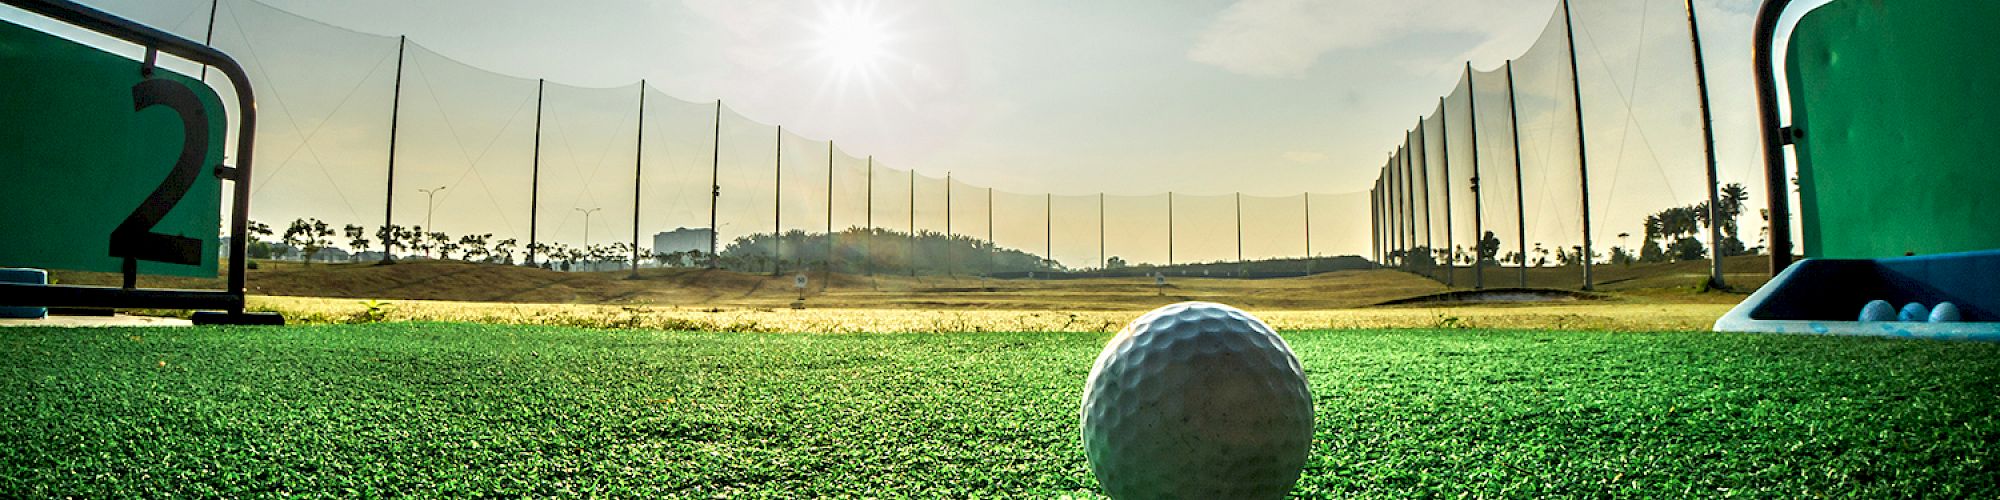 A close-up of a golf ball on a driving range mat, with a sunny sky and practice nets in the background, creating a serene golfing atmosphere.